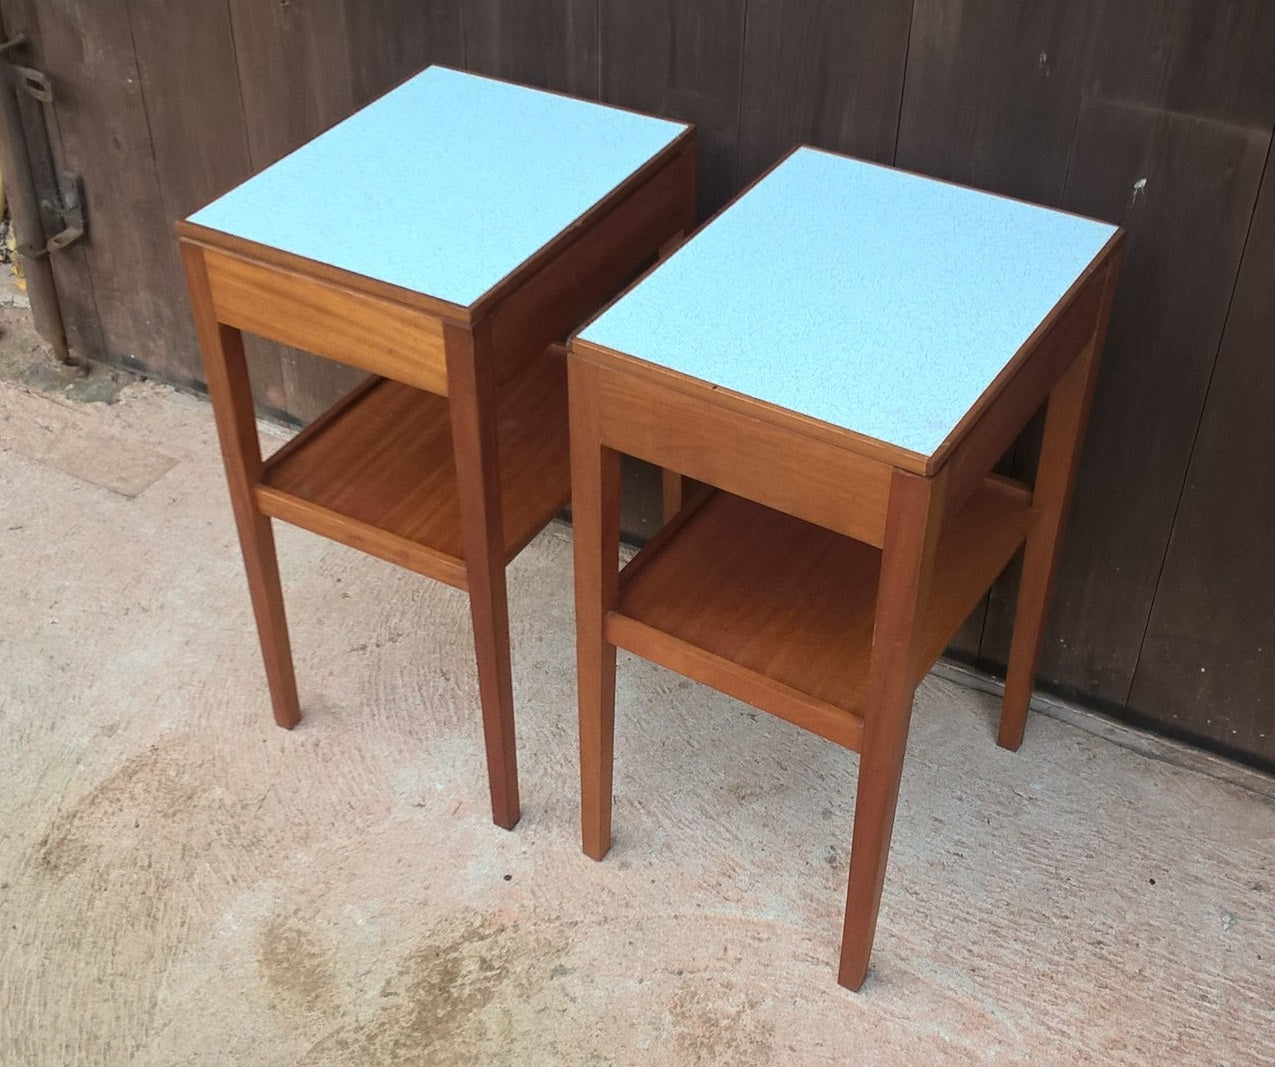 A PAIR OF TEAK RETRO BEDSIDE TABLES - RETRO LAMP TABLE